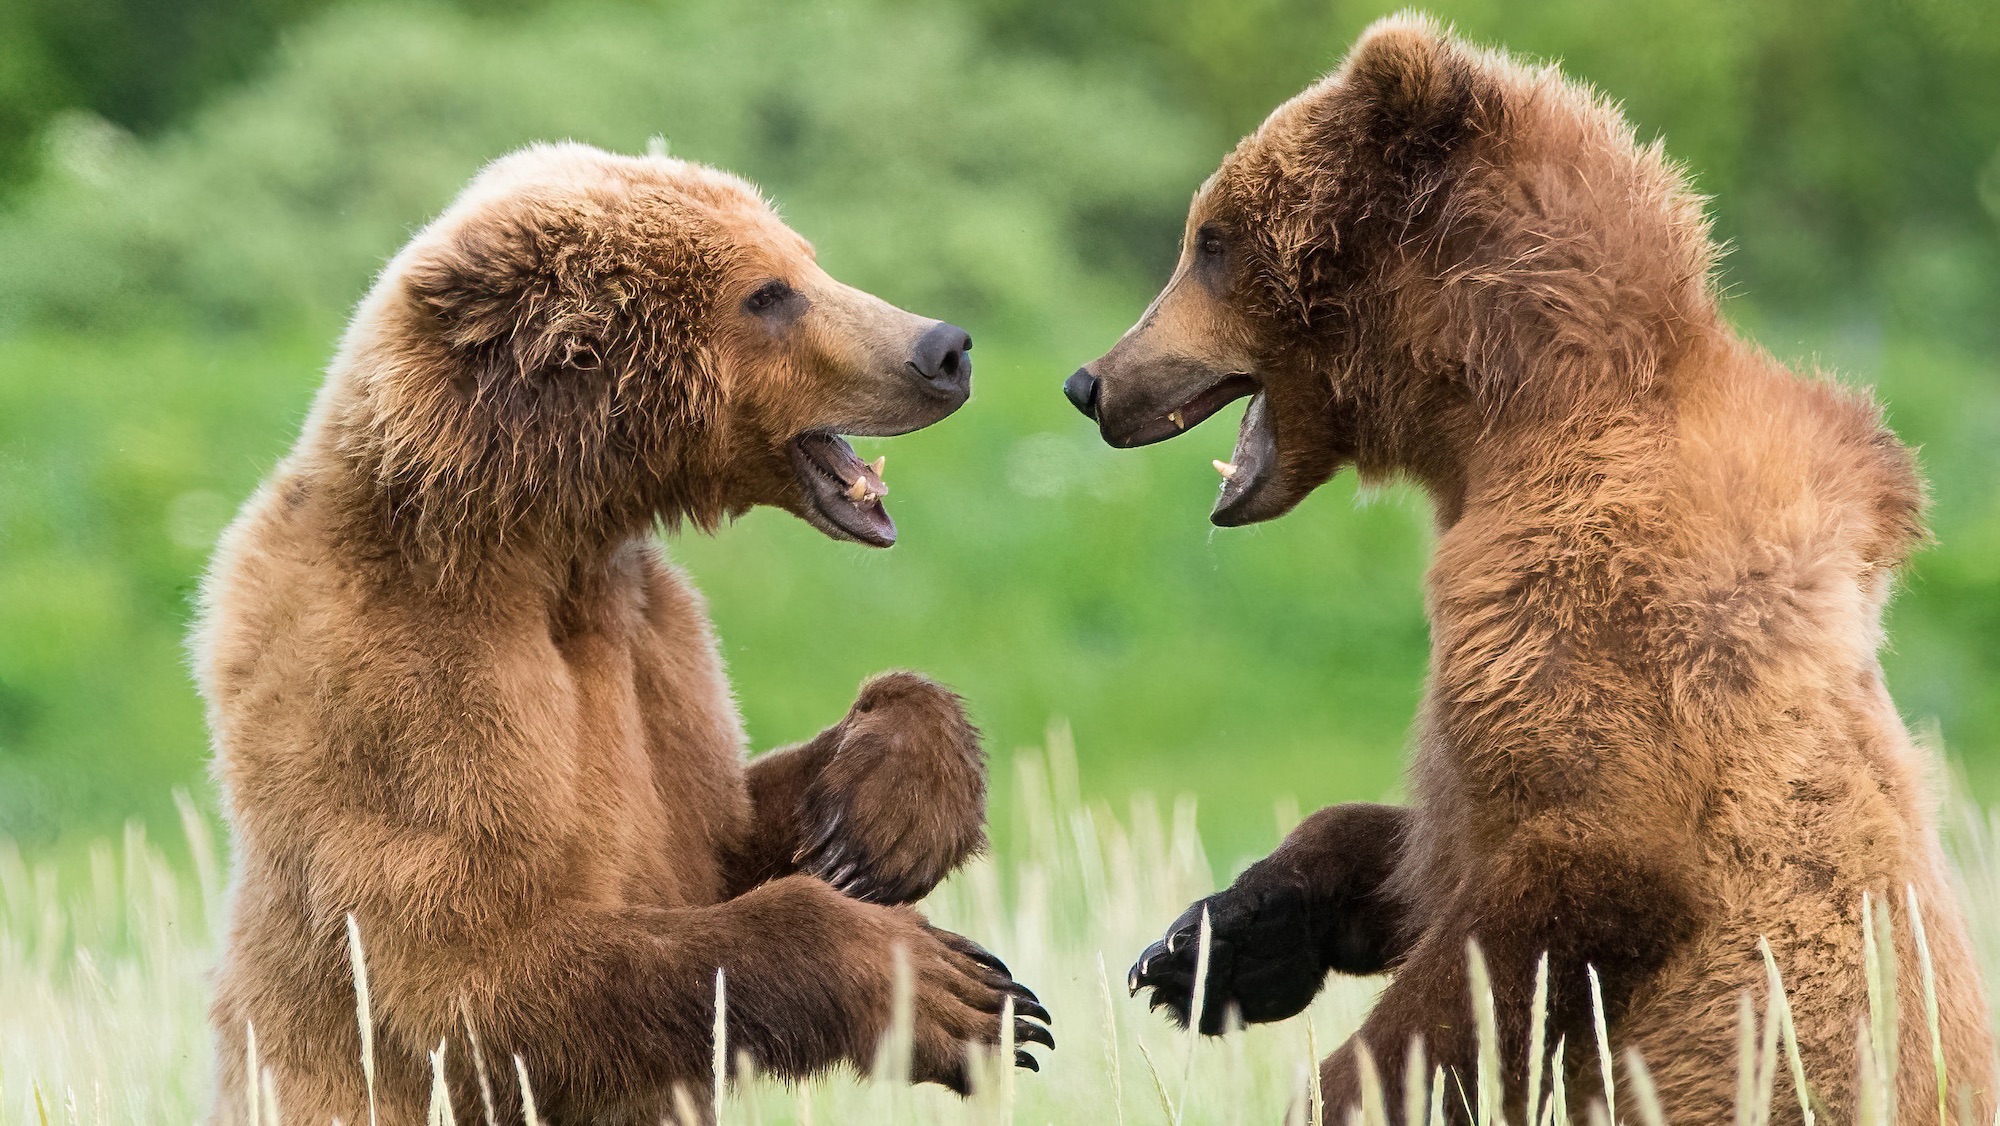 two brown bear cubs with their mouths open looking at each other